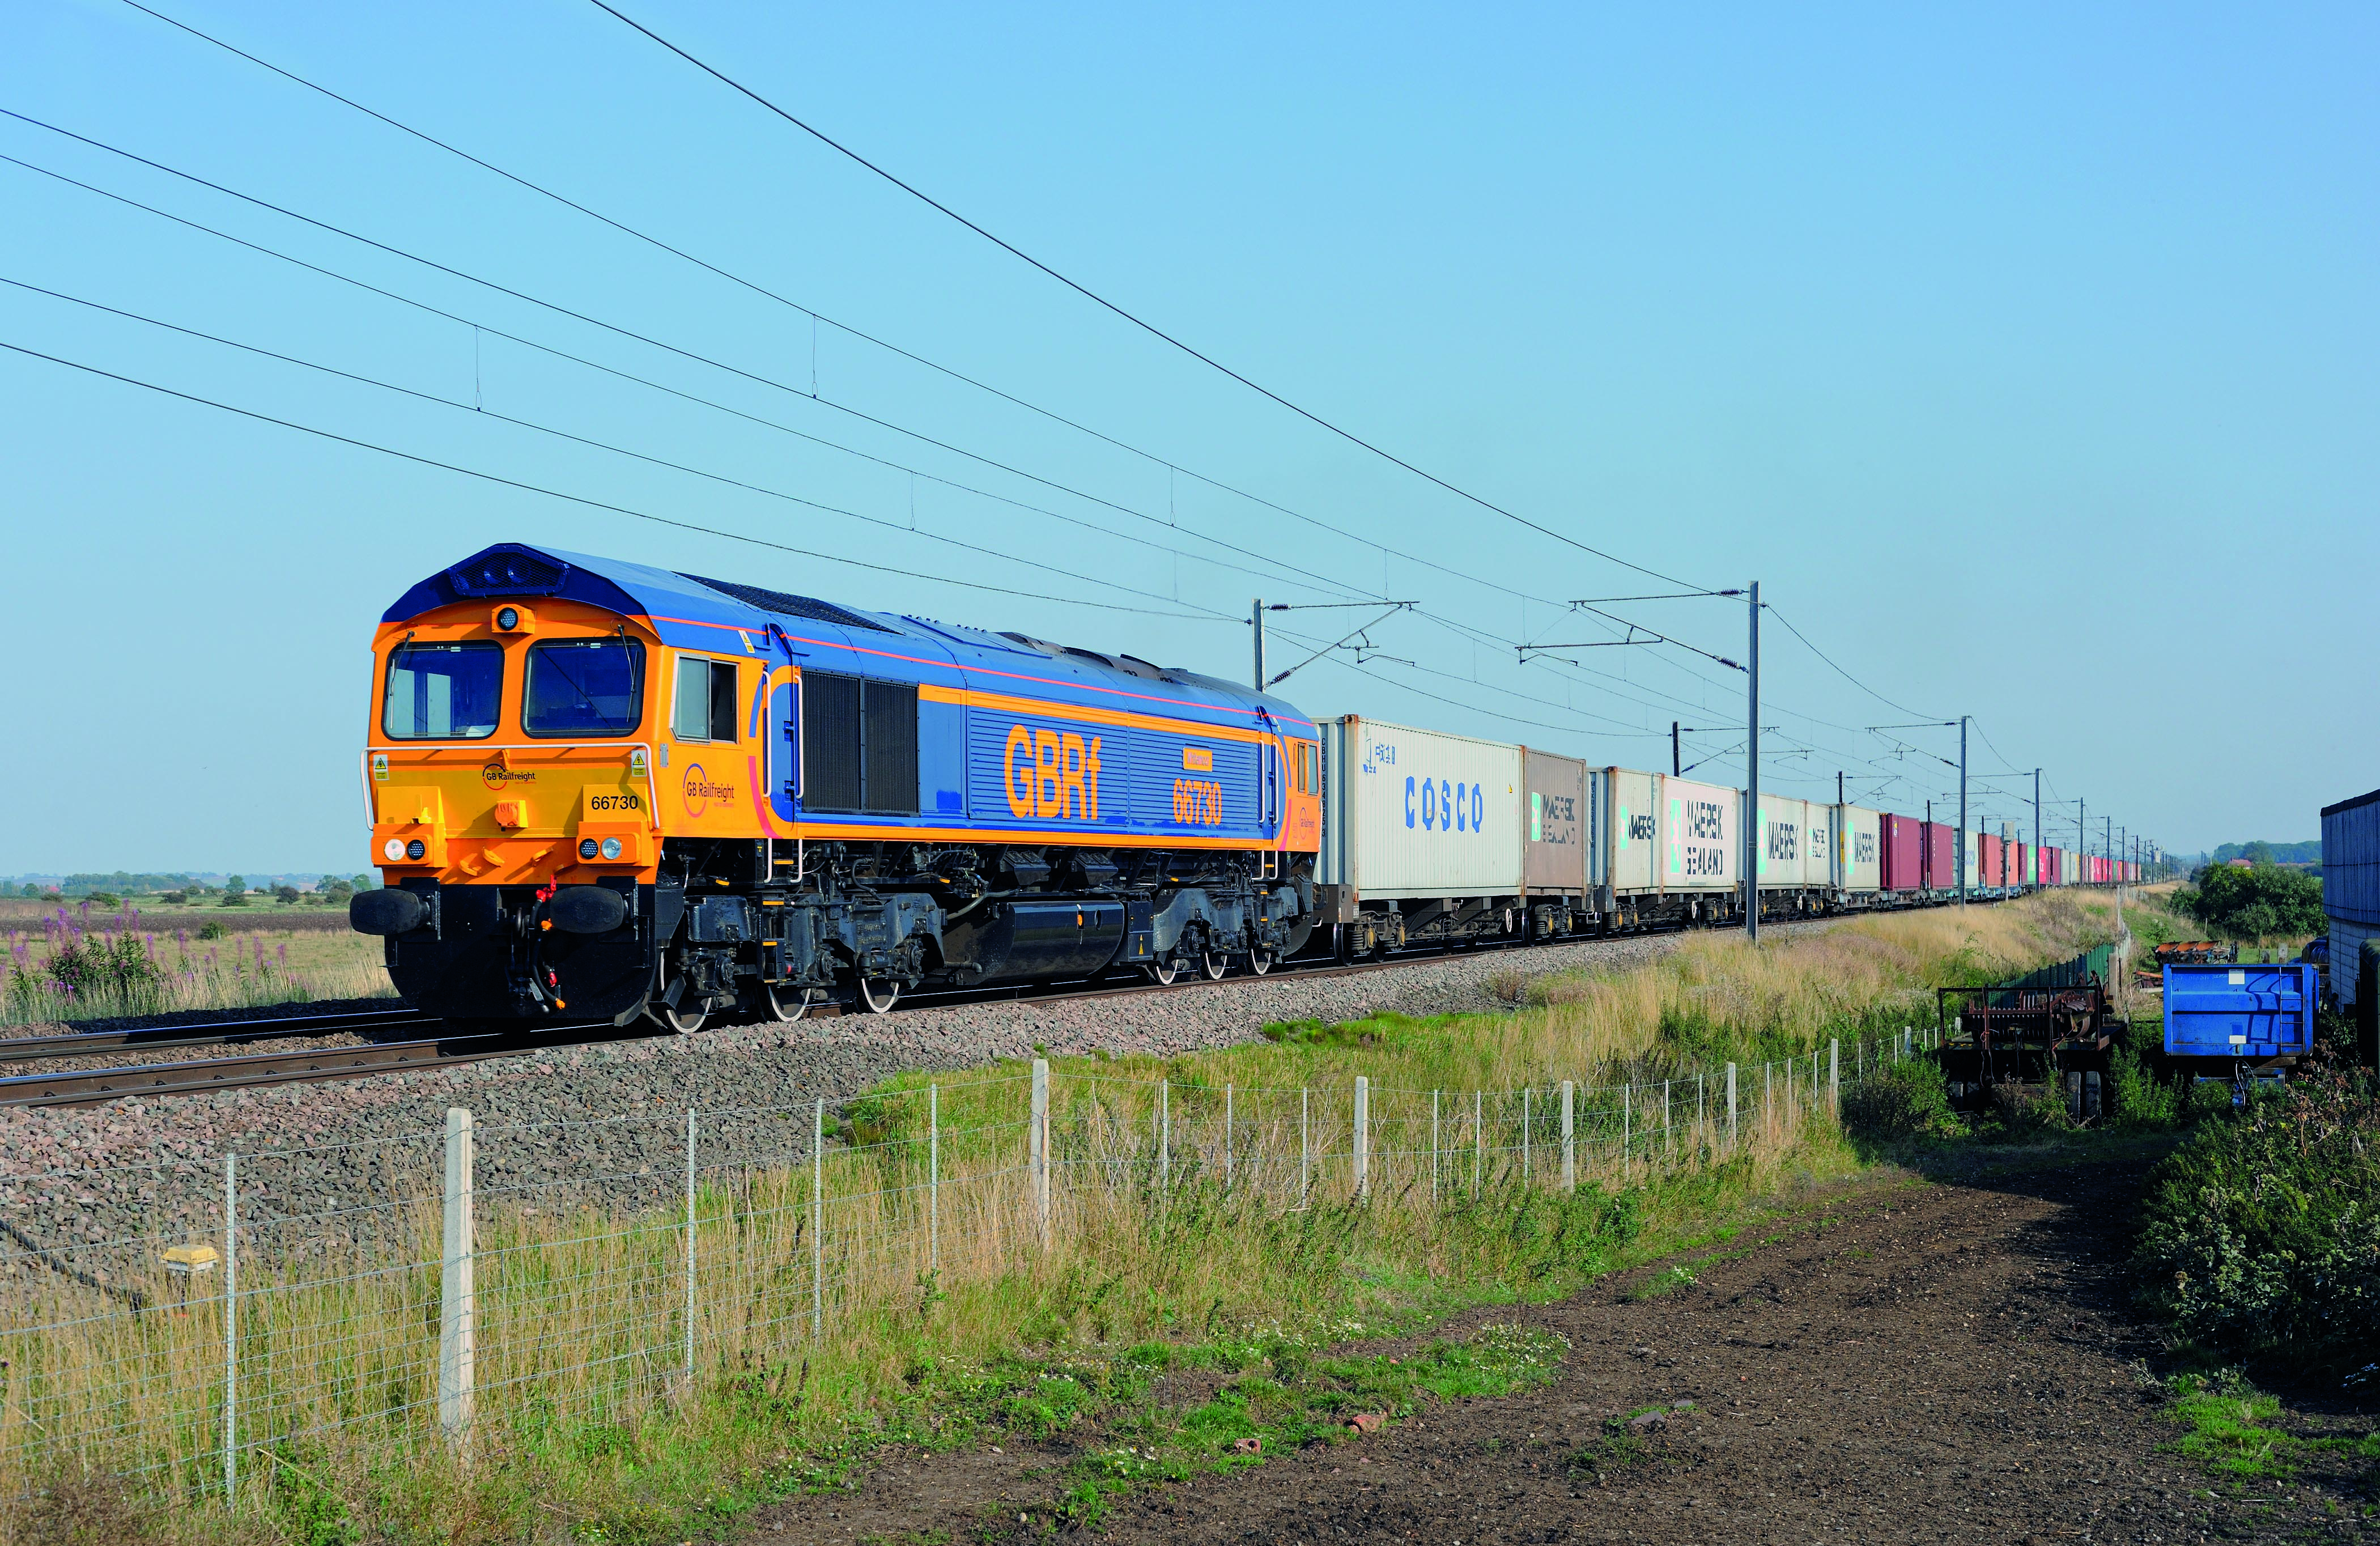 GBRf Class 66s will be operating at the GB Railfreight Gala Weekend at the Nene Valley Railway.